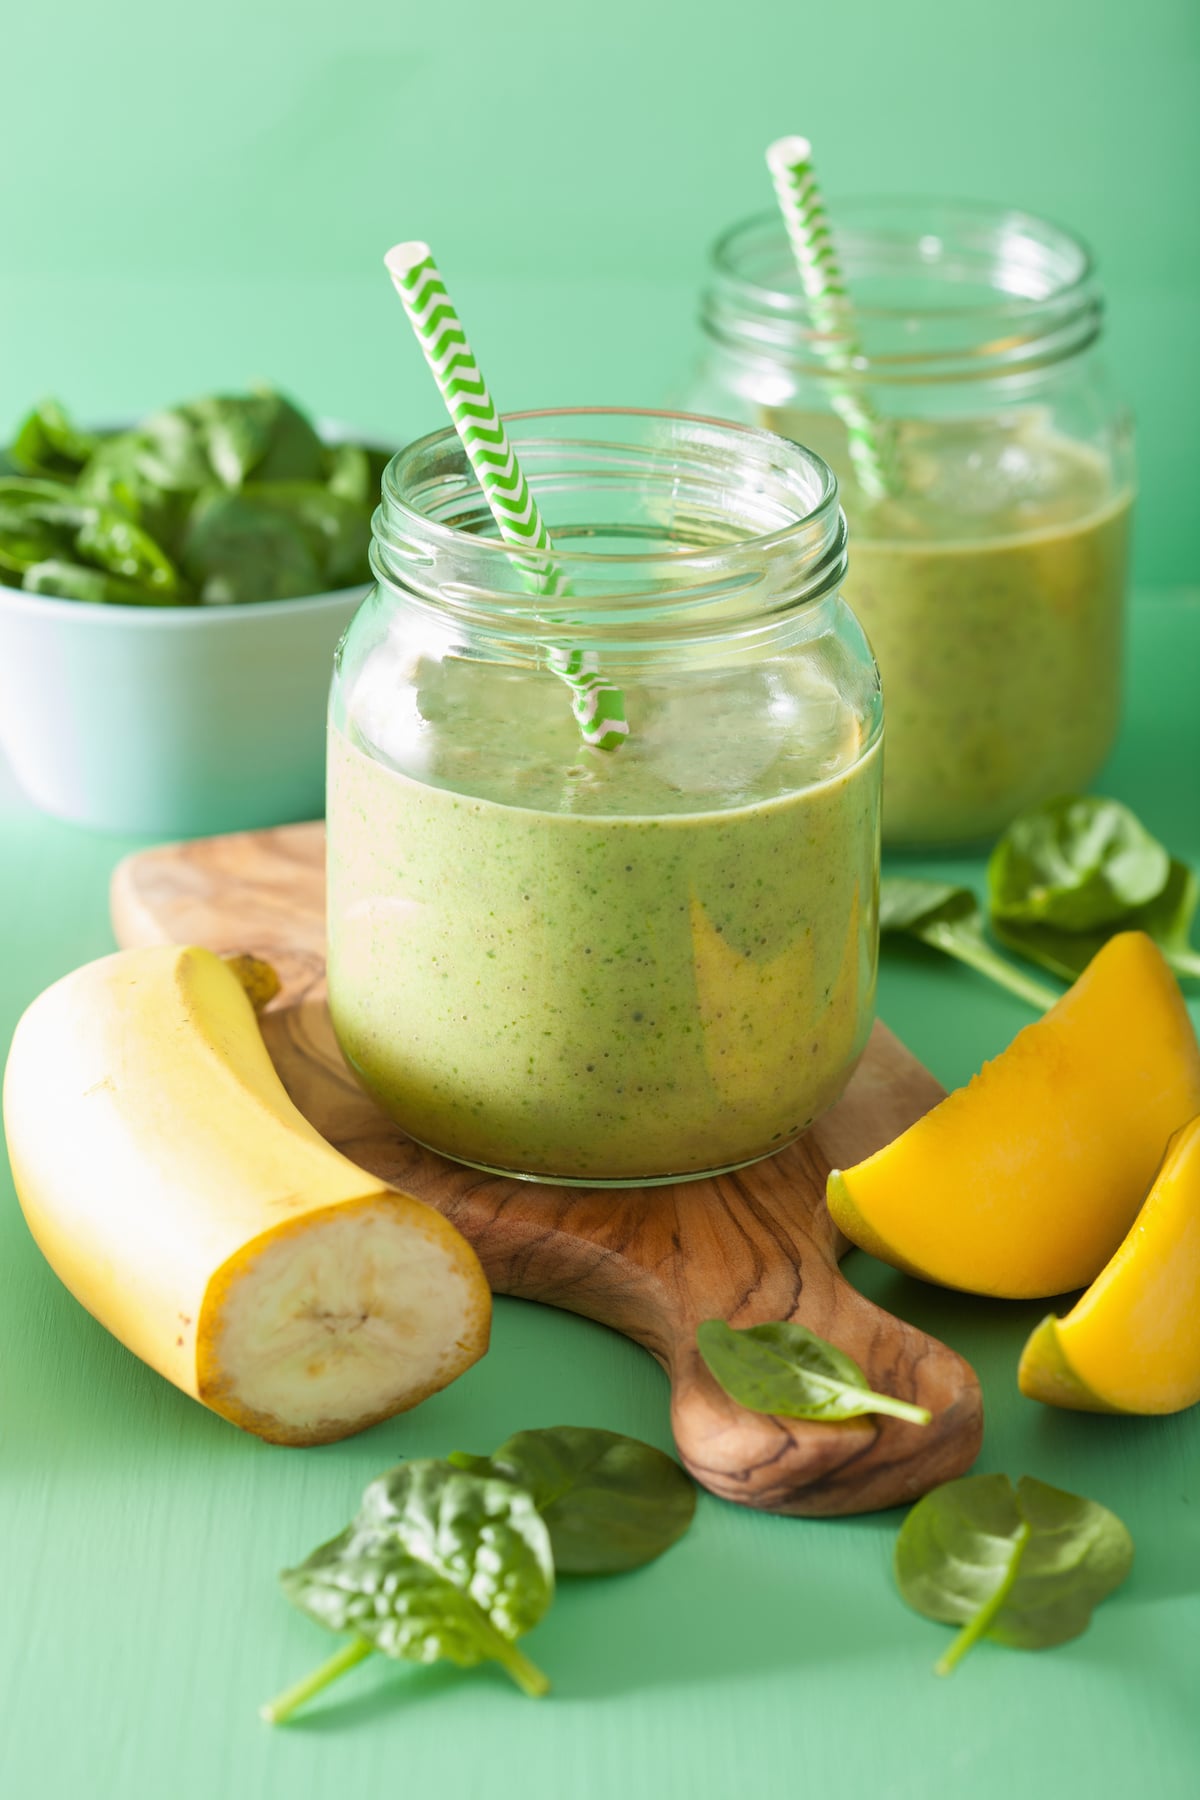 two weight loss green smoothies next to bananas, mango and spinach.